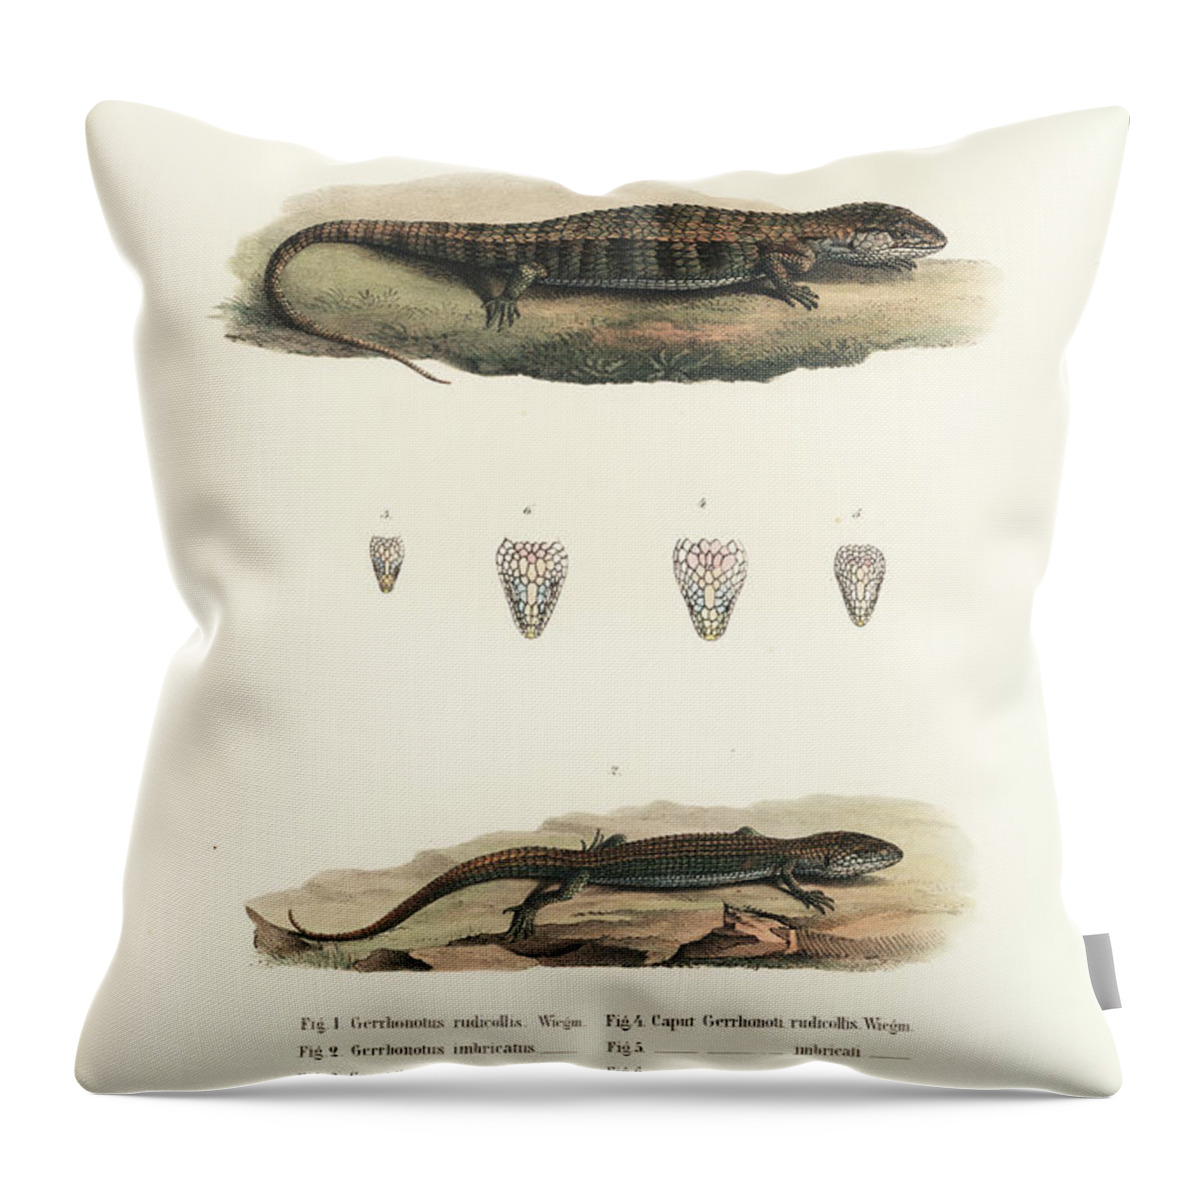 Alligator Lizards Throw Pillow featuring the drawing Alligator Lizards from Mexico by Friedrich August Schmidt